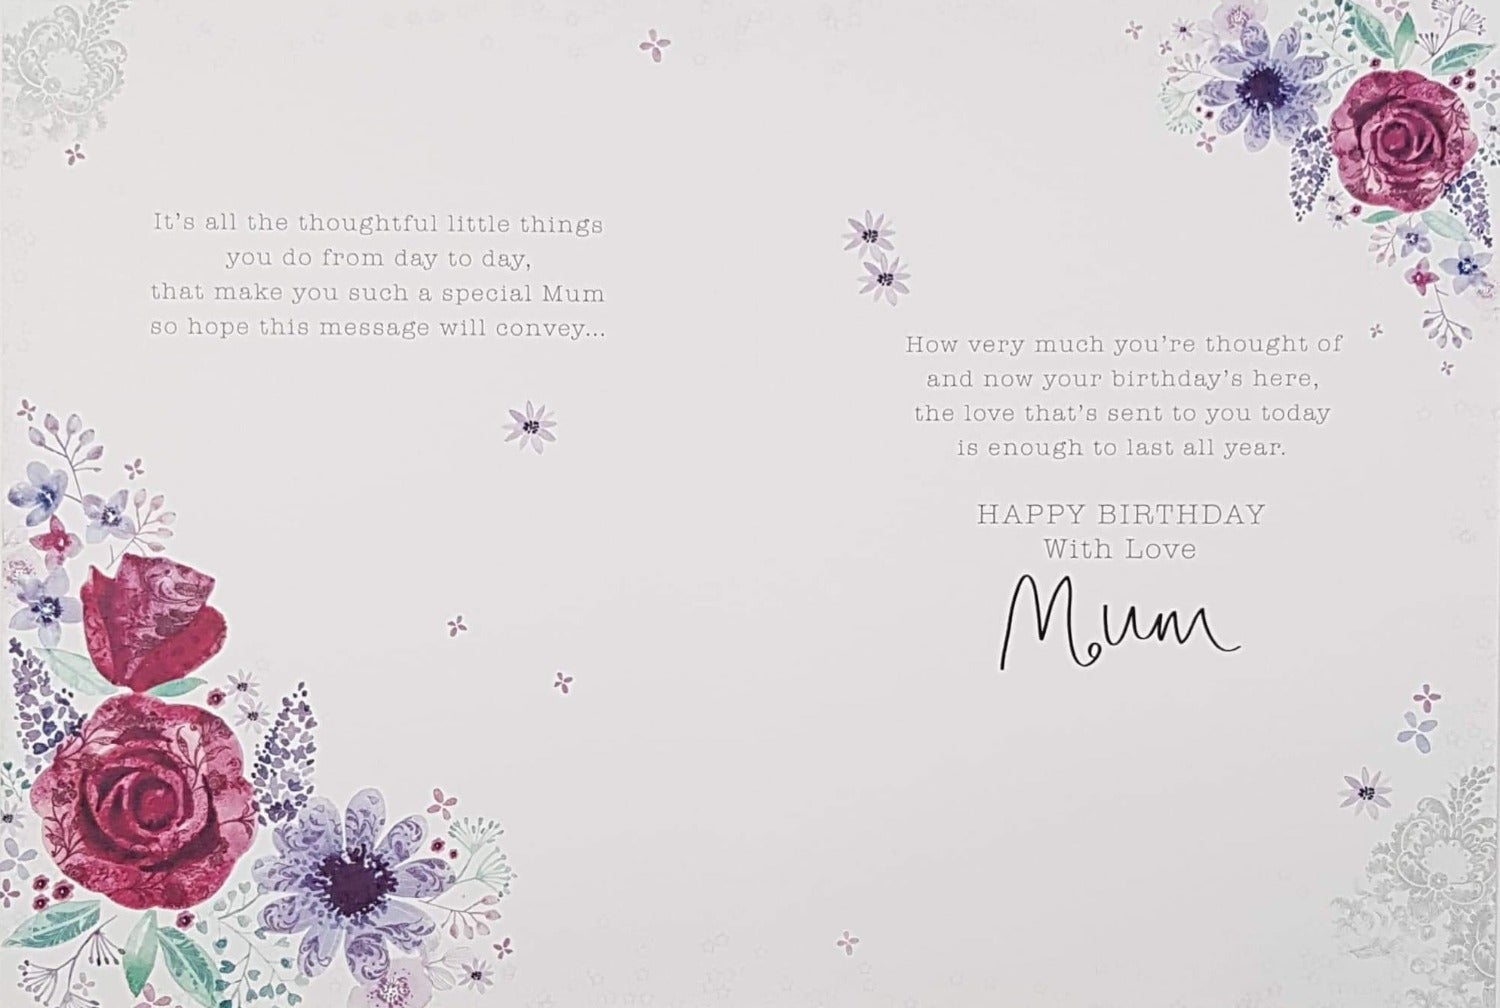 Birthday Card - Mum / 'Hope Your Day Is As Special As You Are'